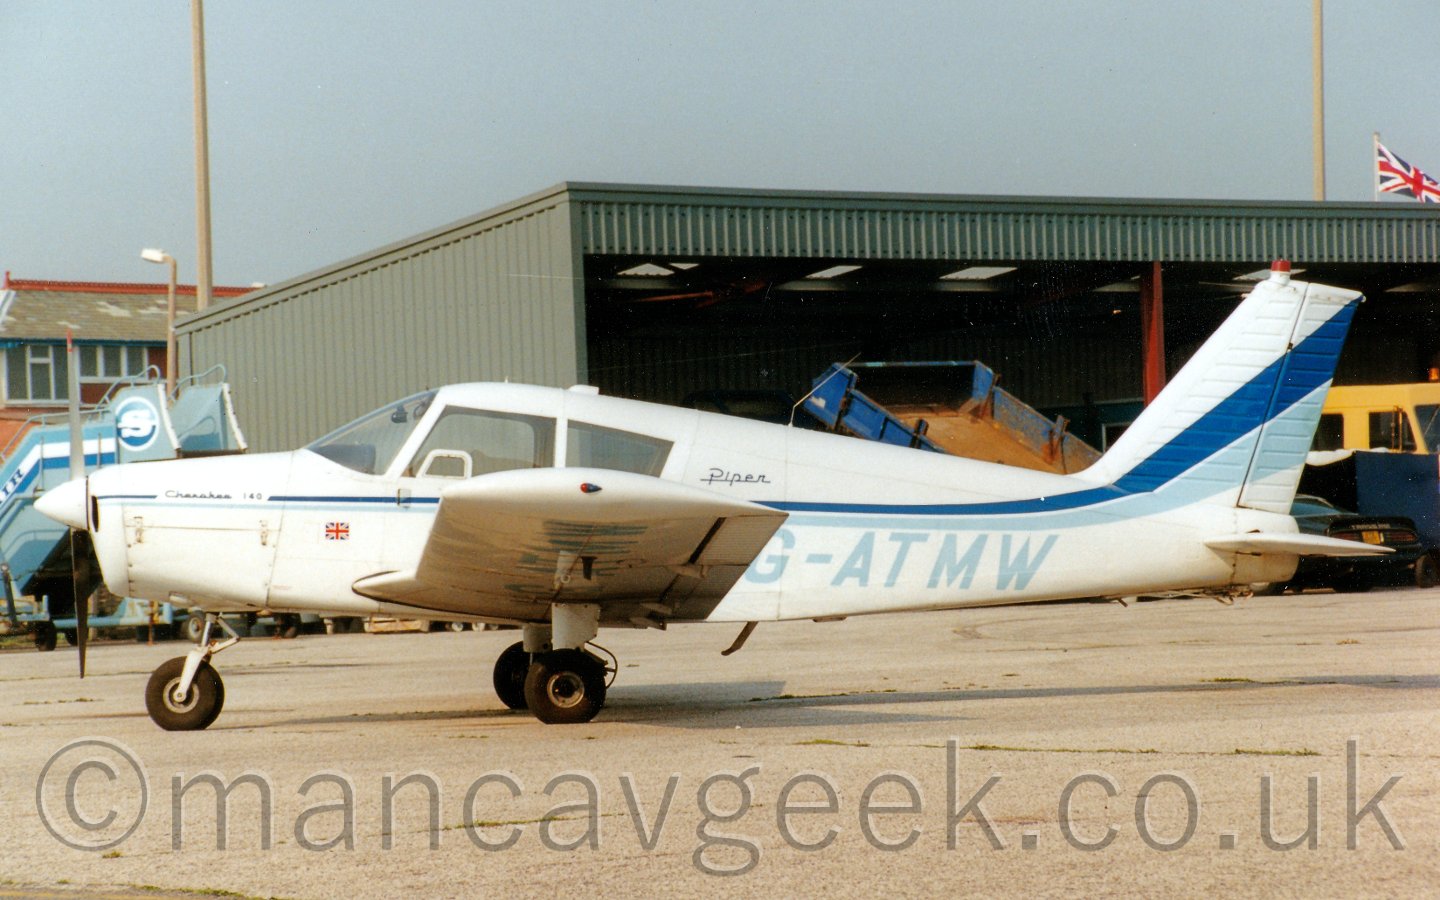 Side view of a single propellor engined light aircraft parked in front of a metal grey building containing some airport vehicles. The planes body is mostly white, with a two-tone blue strip running backwards from the nose before sweeping up into the tail, getting wider as it goes.